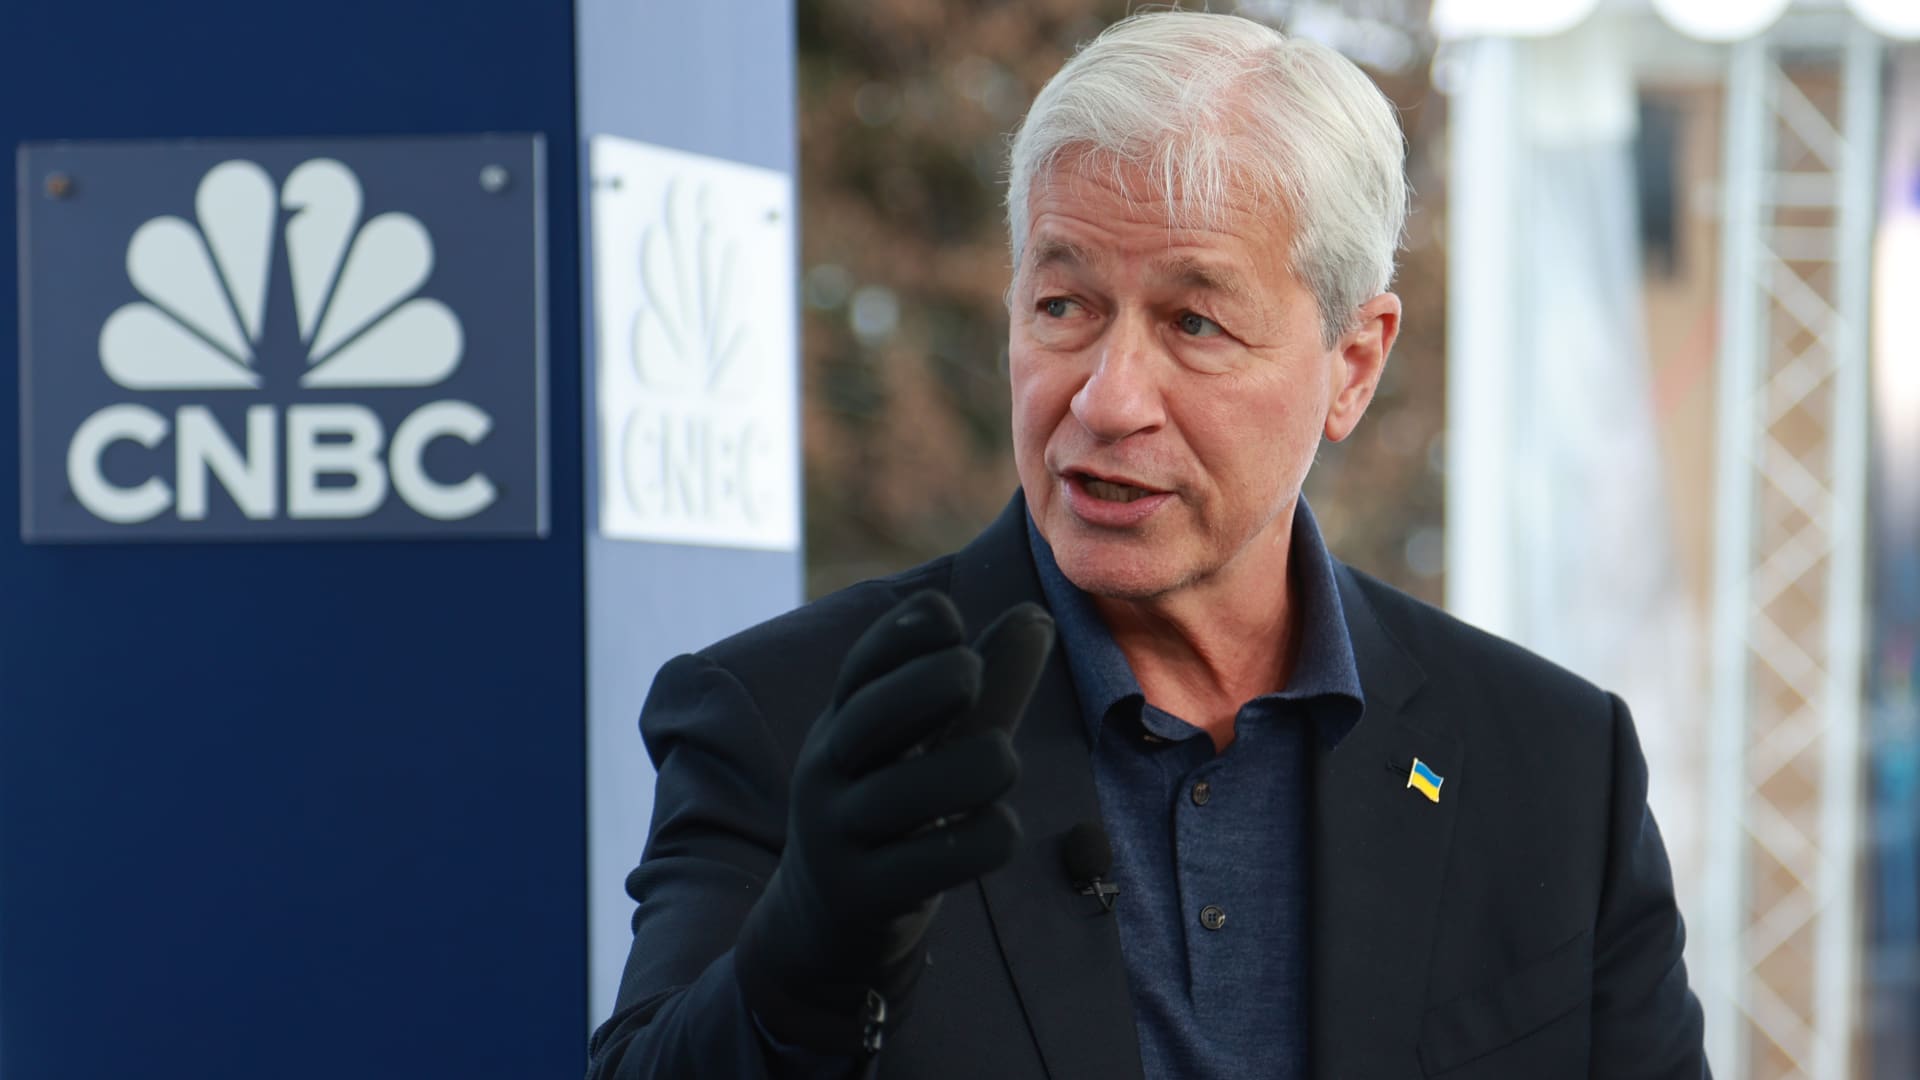 Jamie Dimon says he's done talking about bitcoin: 'I don't care'